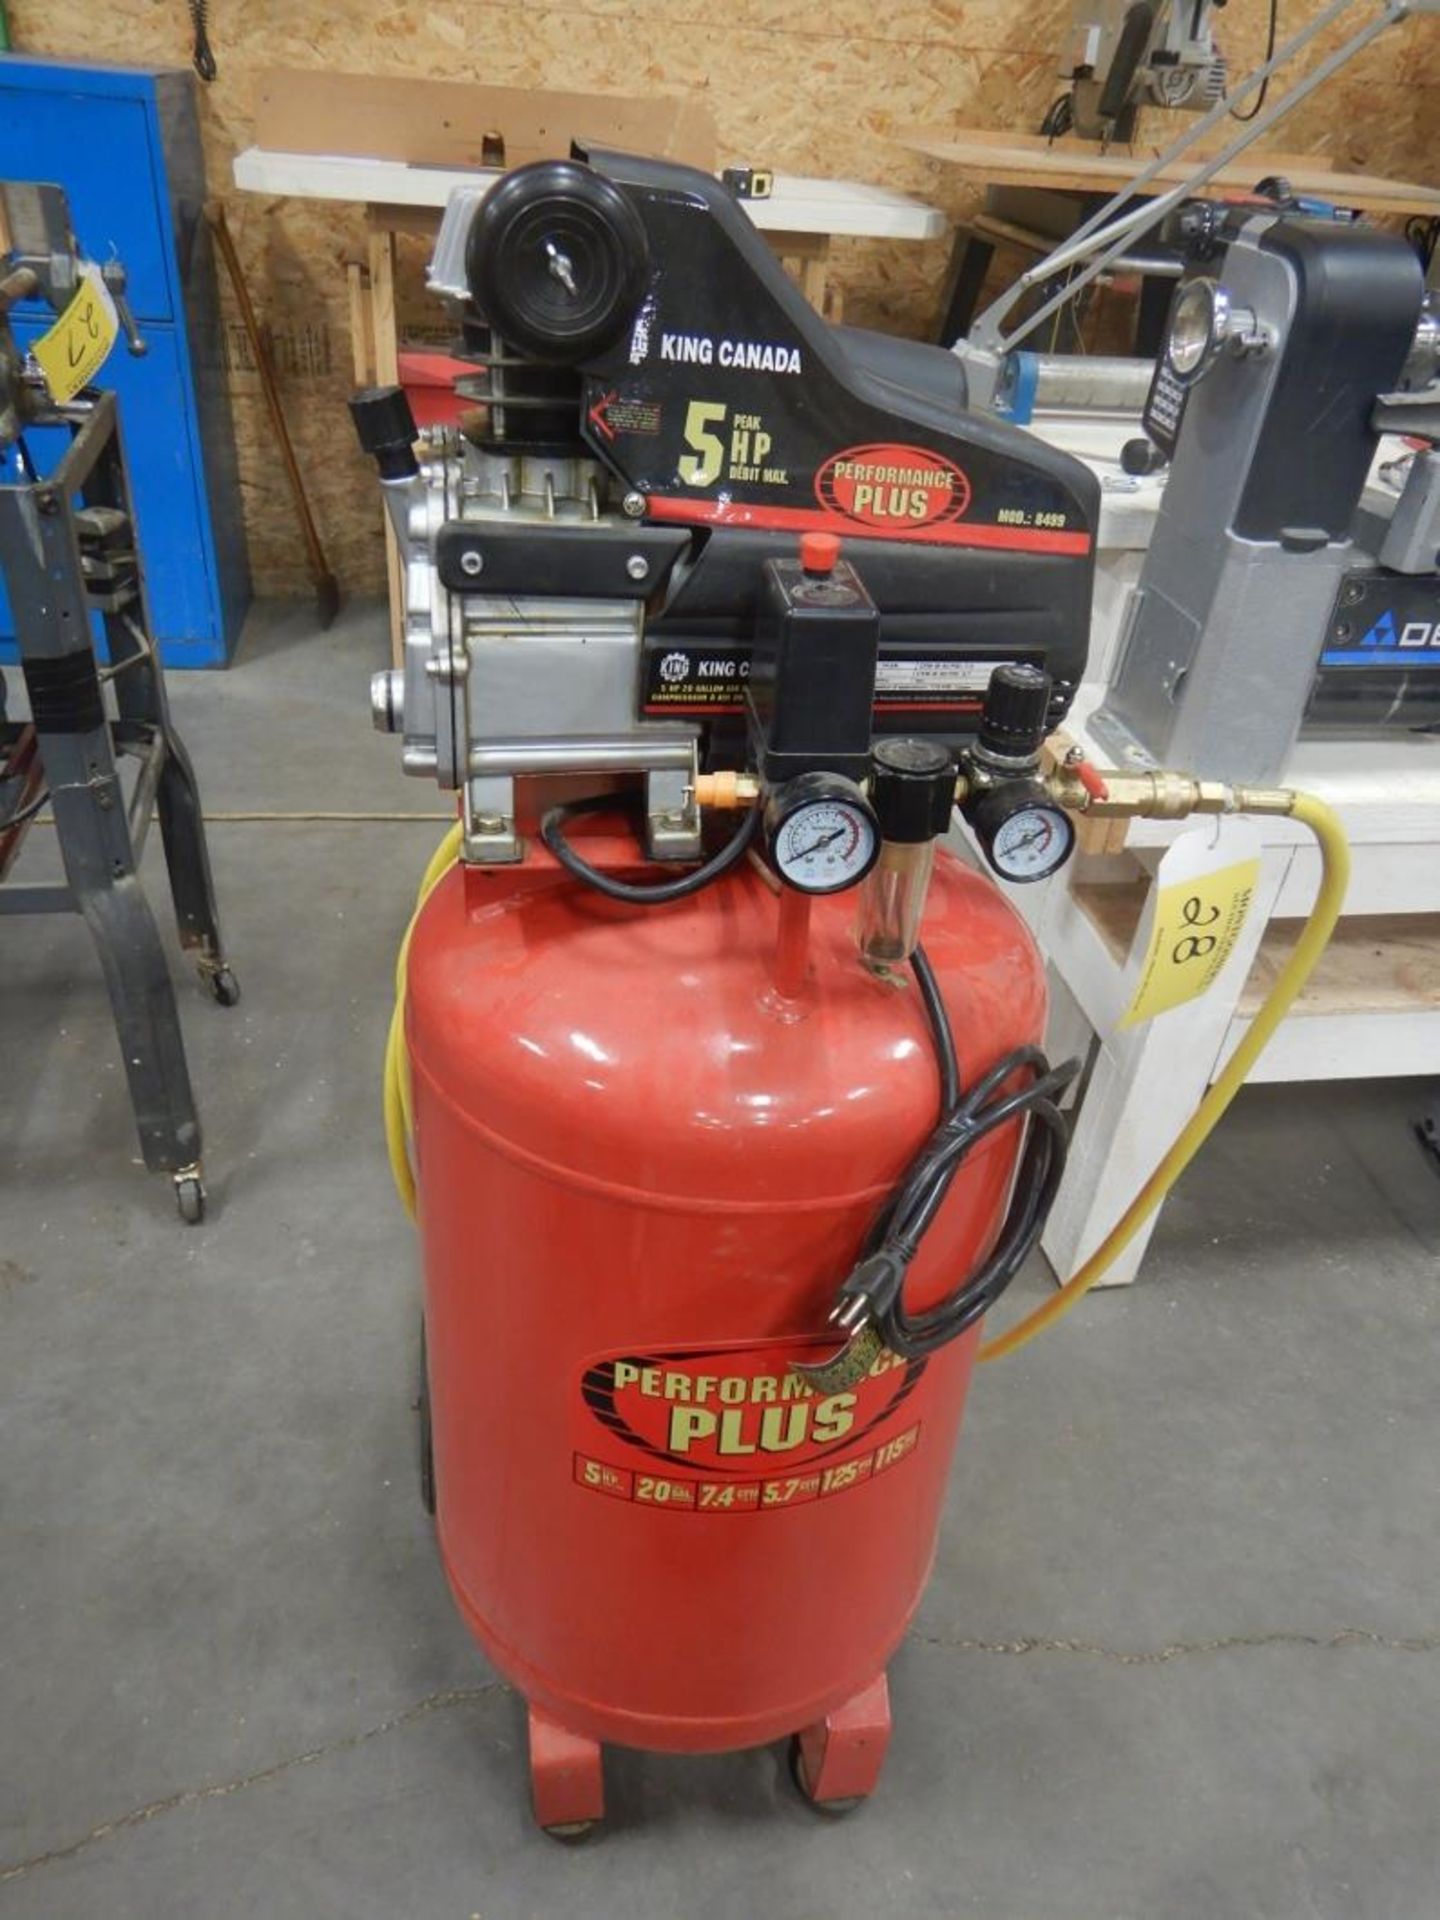 KING CANADA PERFORMANCE PLUS UPRIGHT 5HP AIR COMPRESSOR W/ HOSE - Image 7 of 8